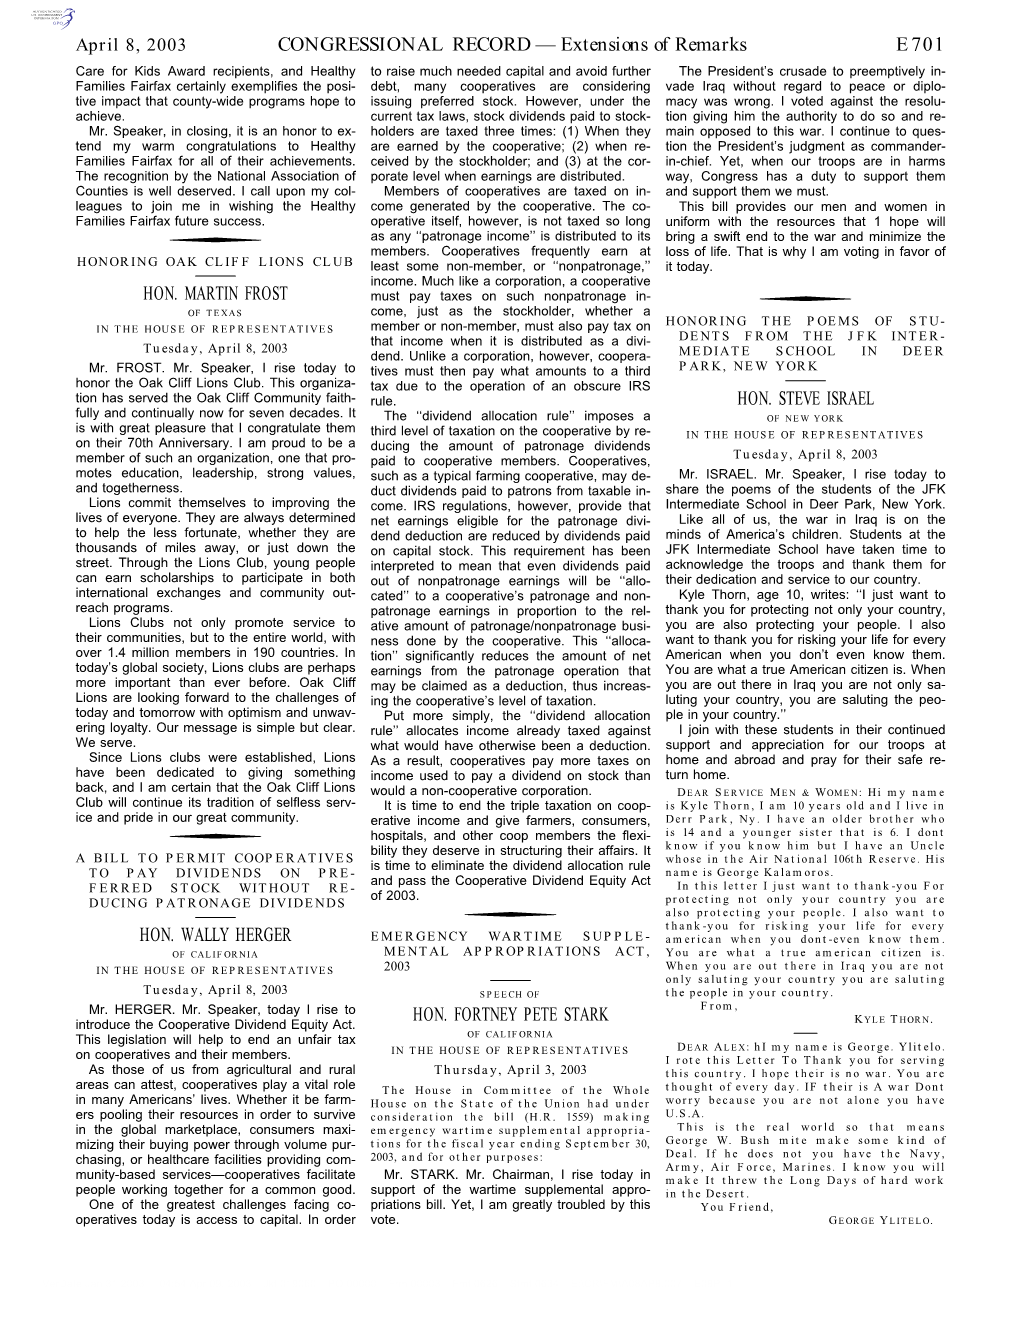 CONGRESSIONAL RECORD— Extensions of Remarks E701 HON. MARTIN FROST HON. WALLY HERGER HON. FORTNEY PETE STARK HON. STEVE ISRAEL